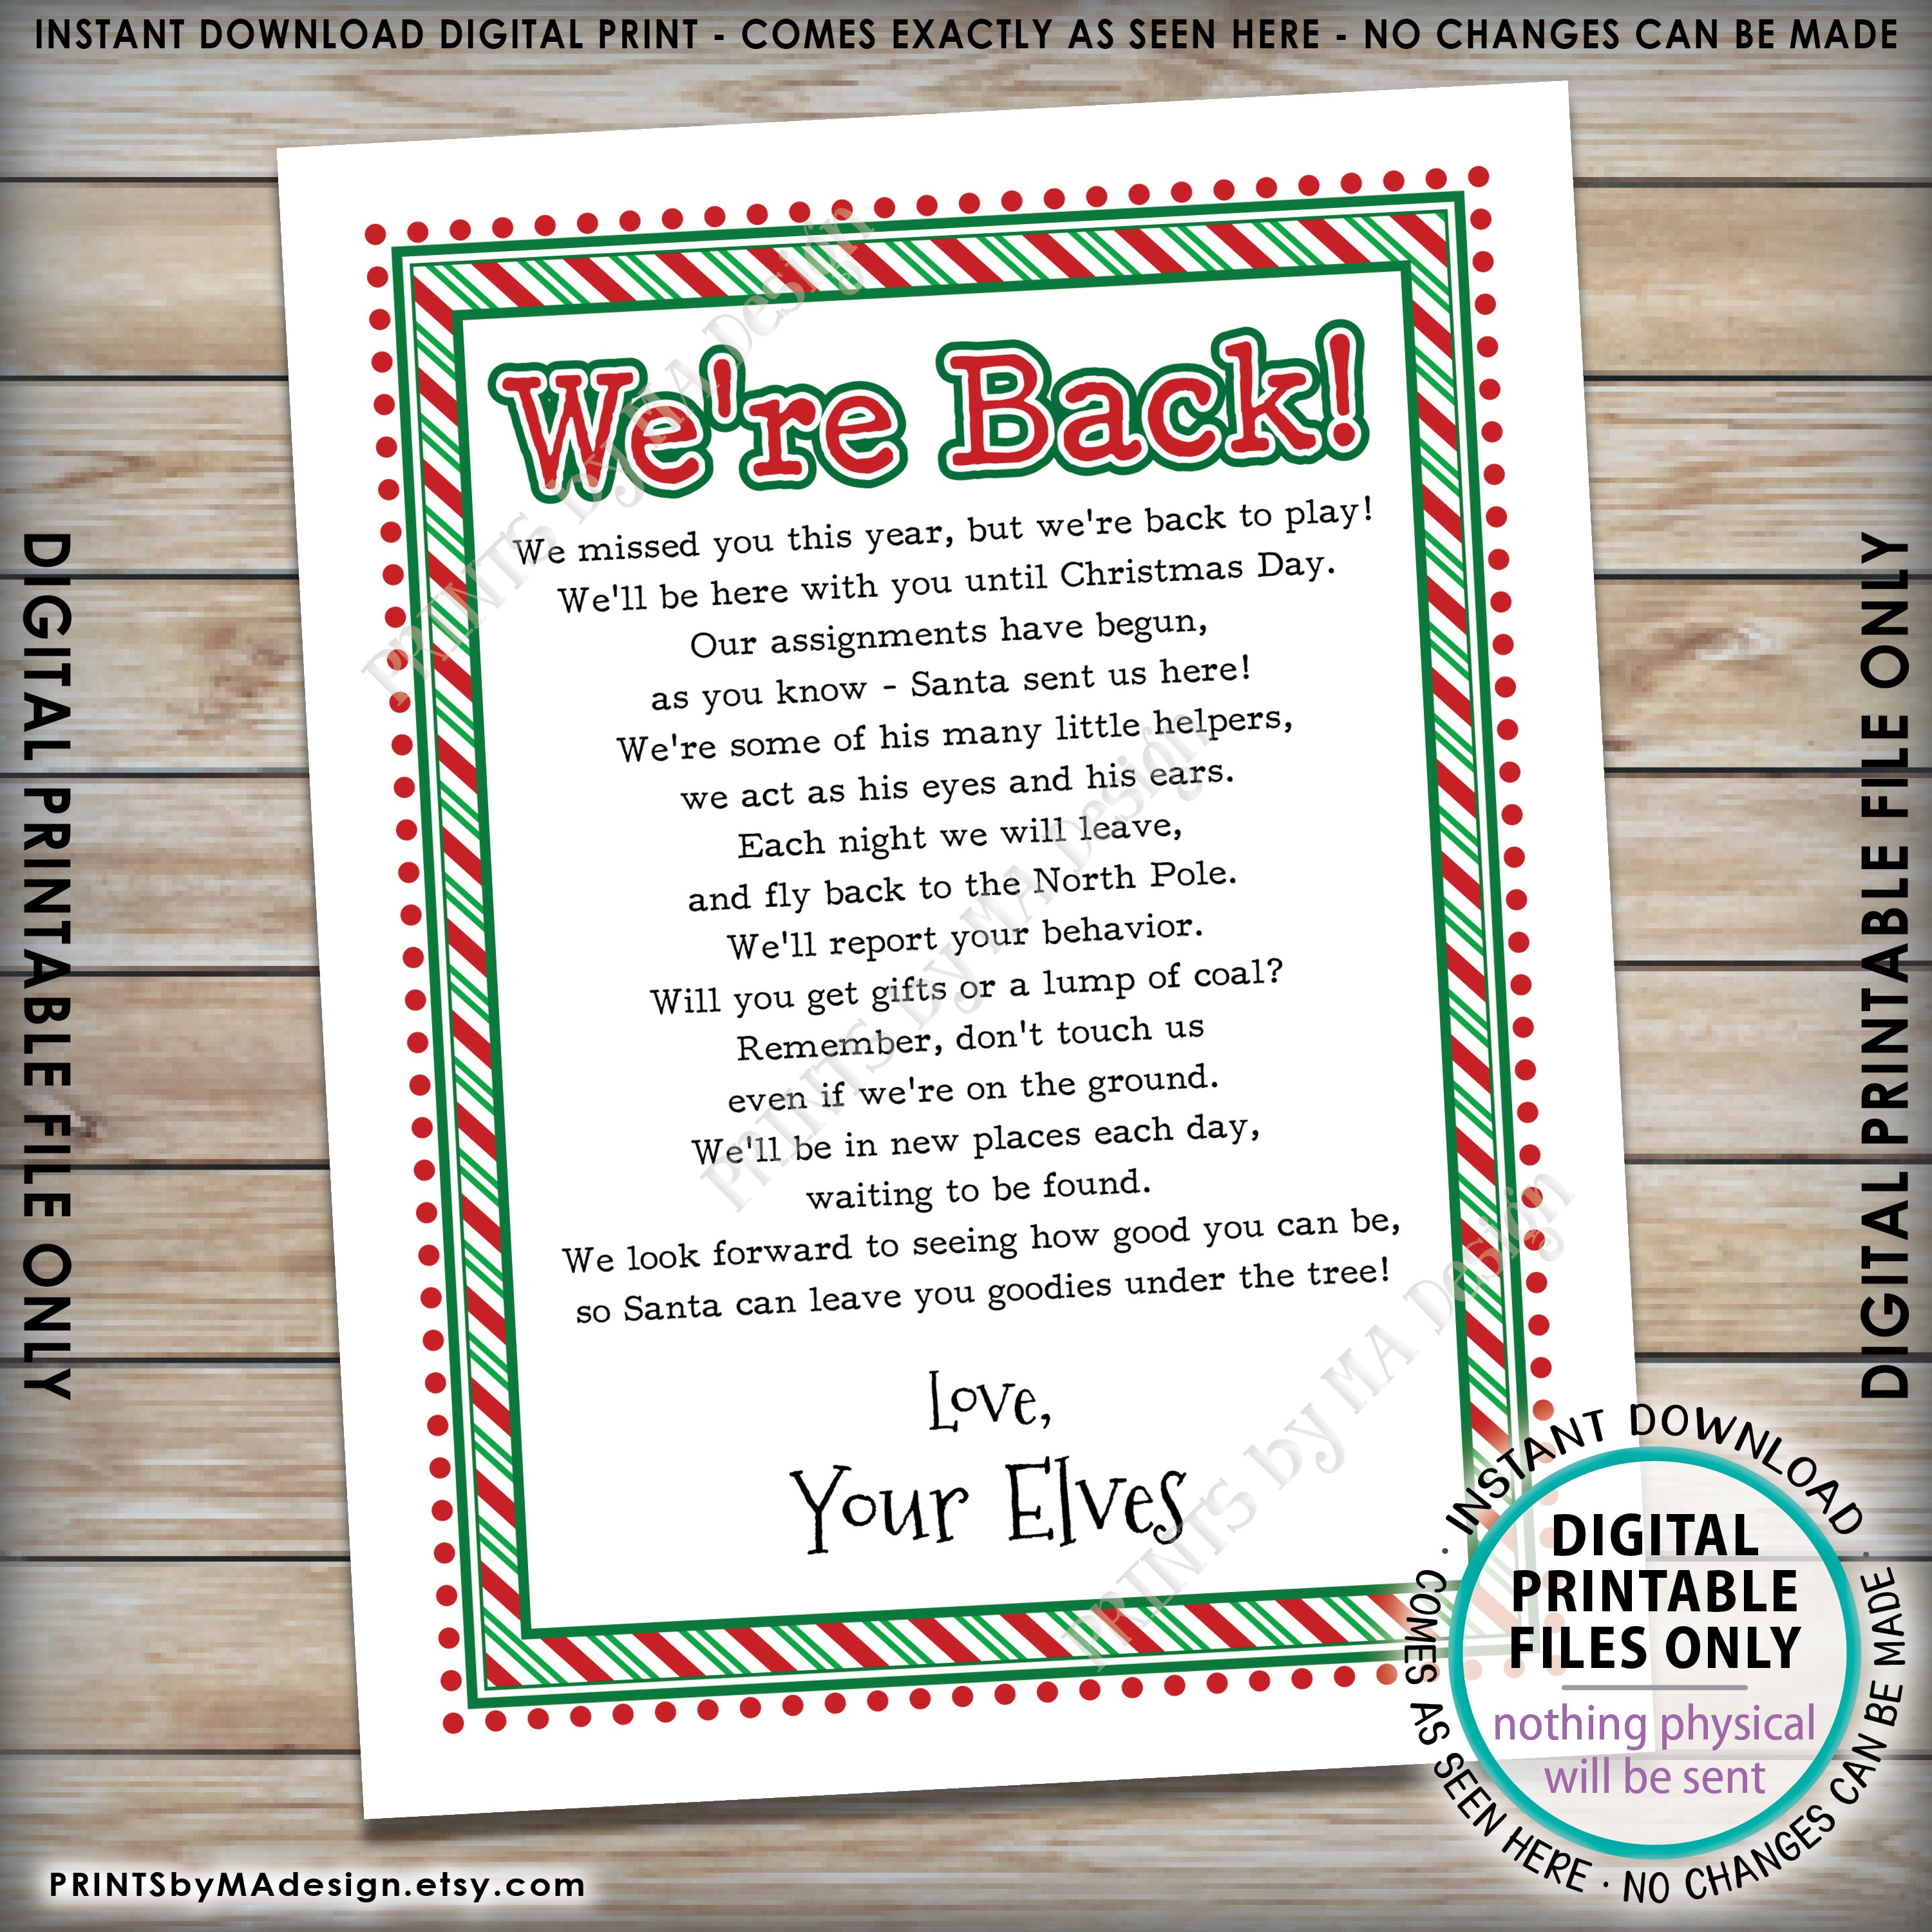 welcome-back-letter-to-kids-from-their-christmas-elves-have-returned-we-re-back-elf-hello